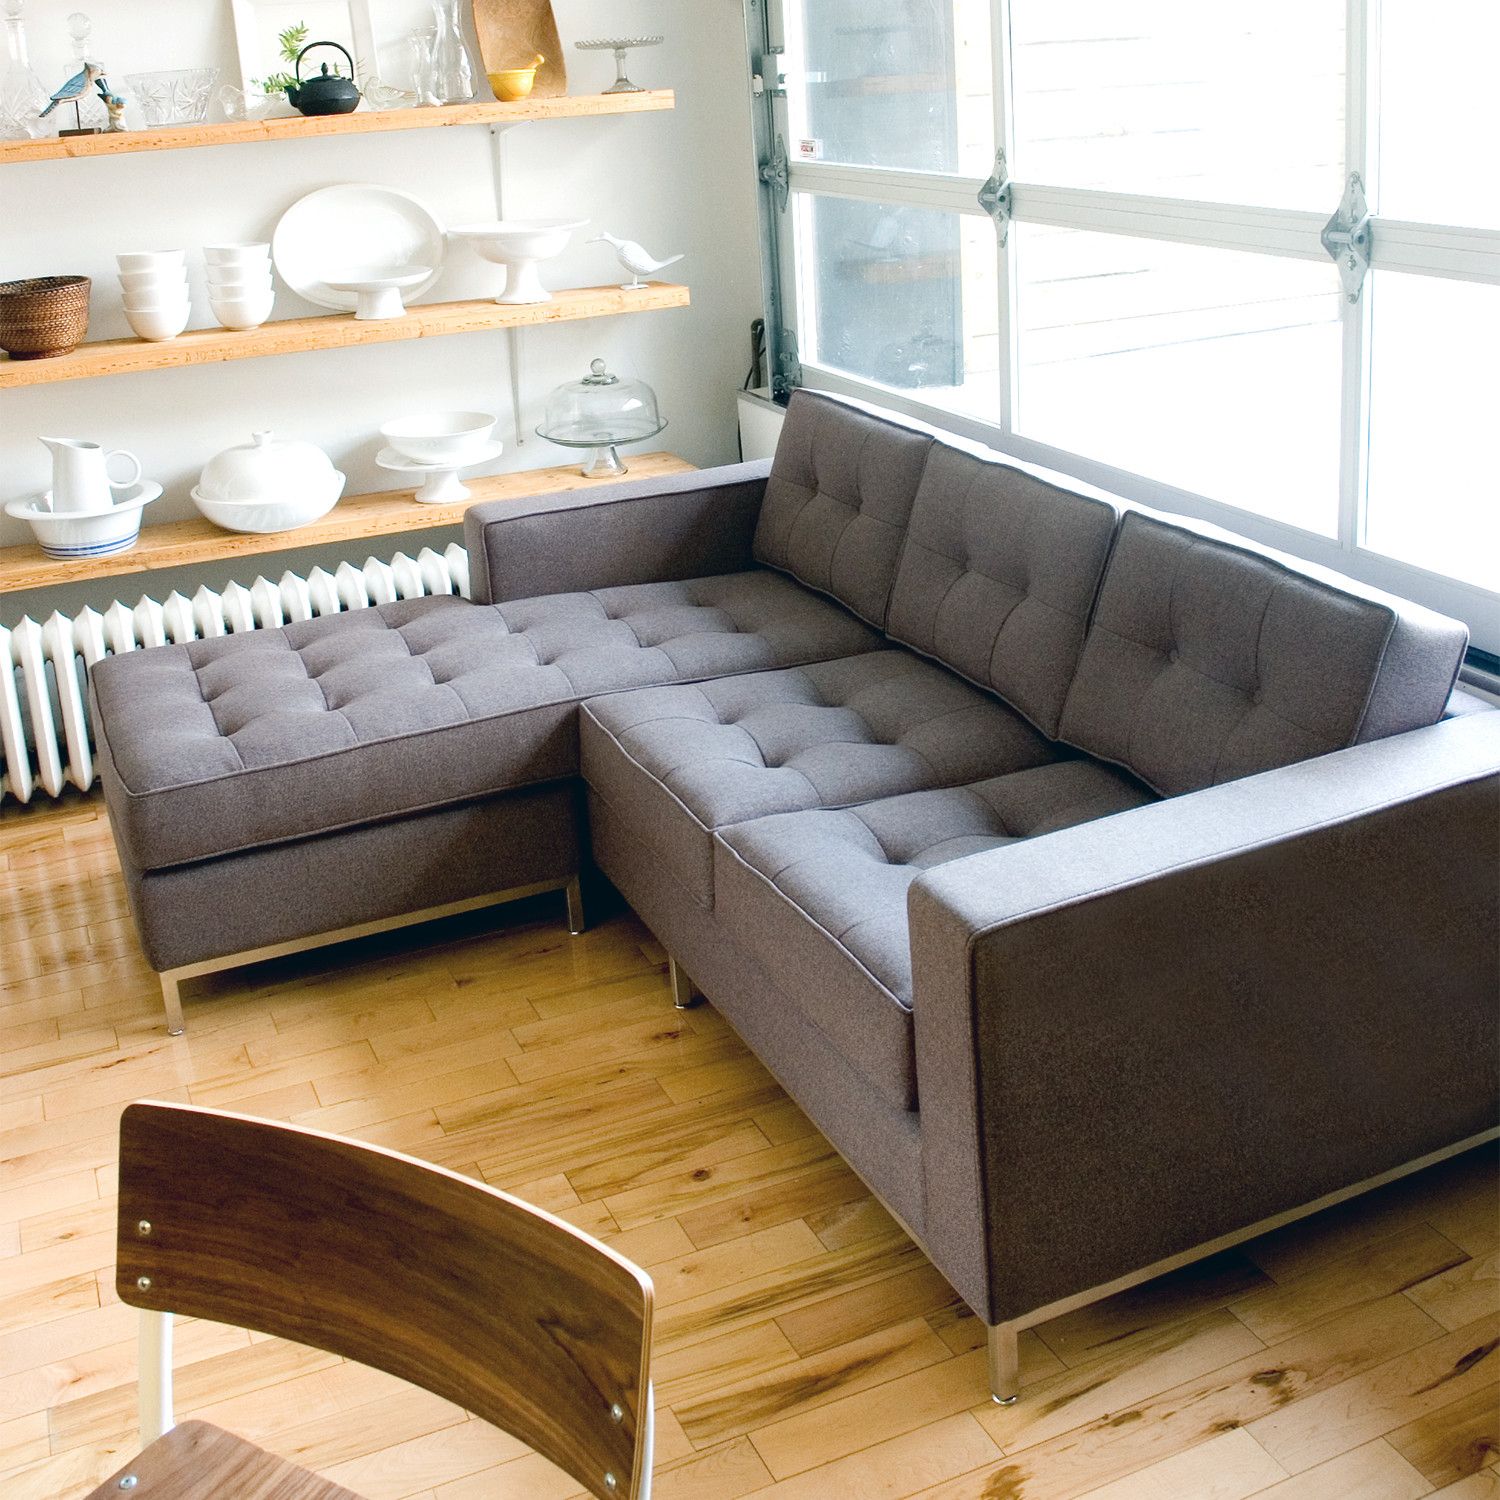 Modern Sectional Sofas For Small Spaces – Ideas On Foter Throughout Sofas For Small Spaces (View 11 of 20)